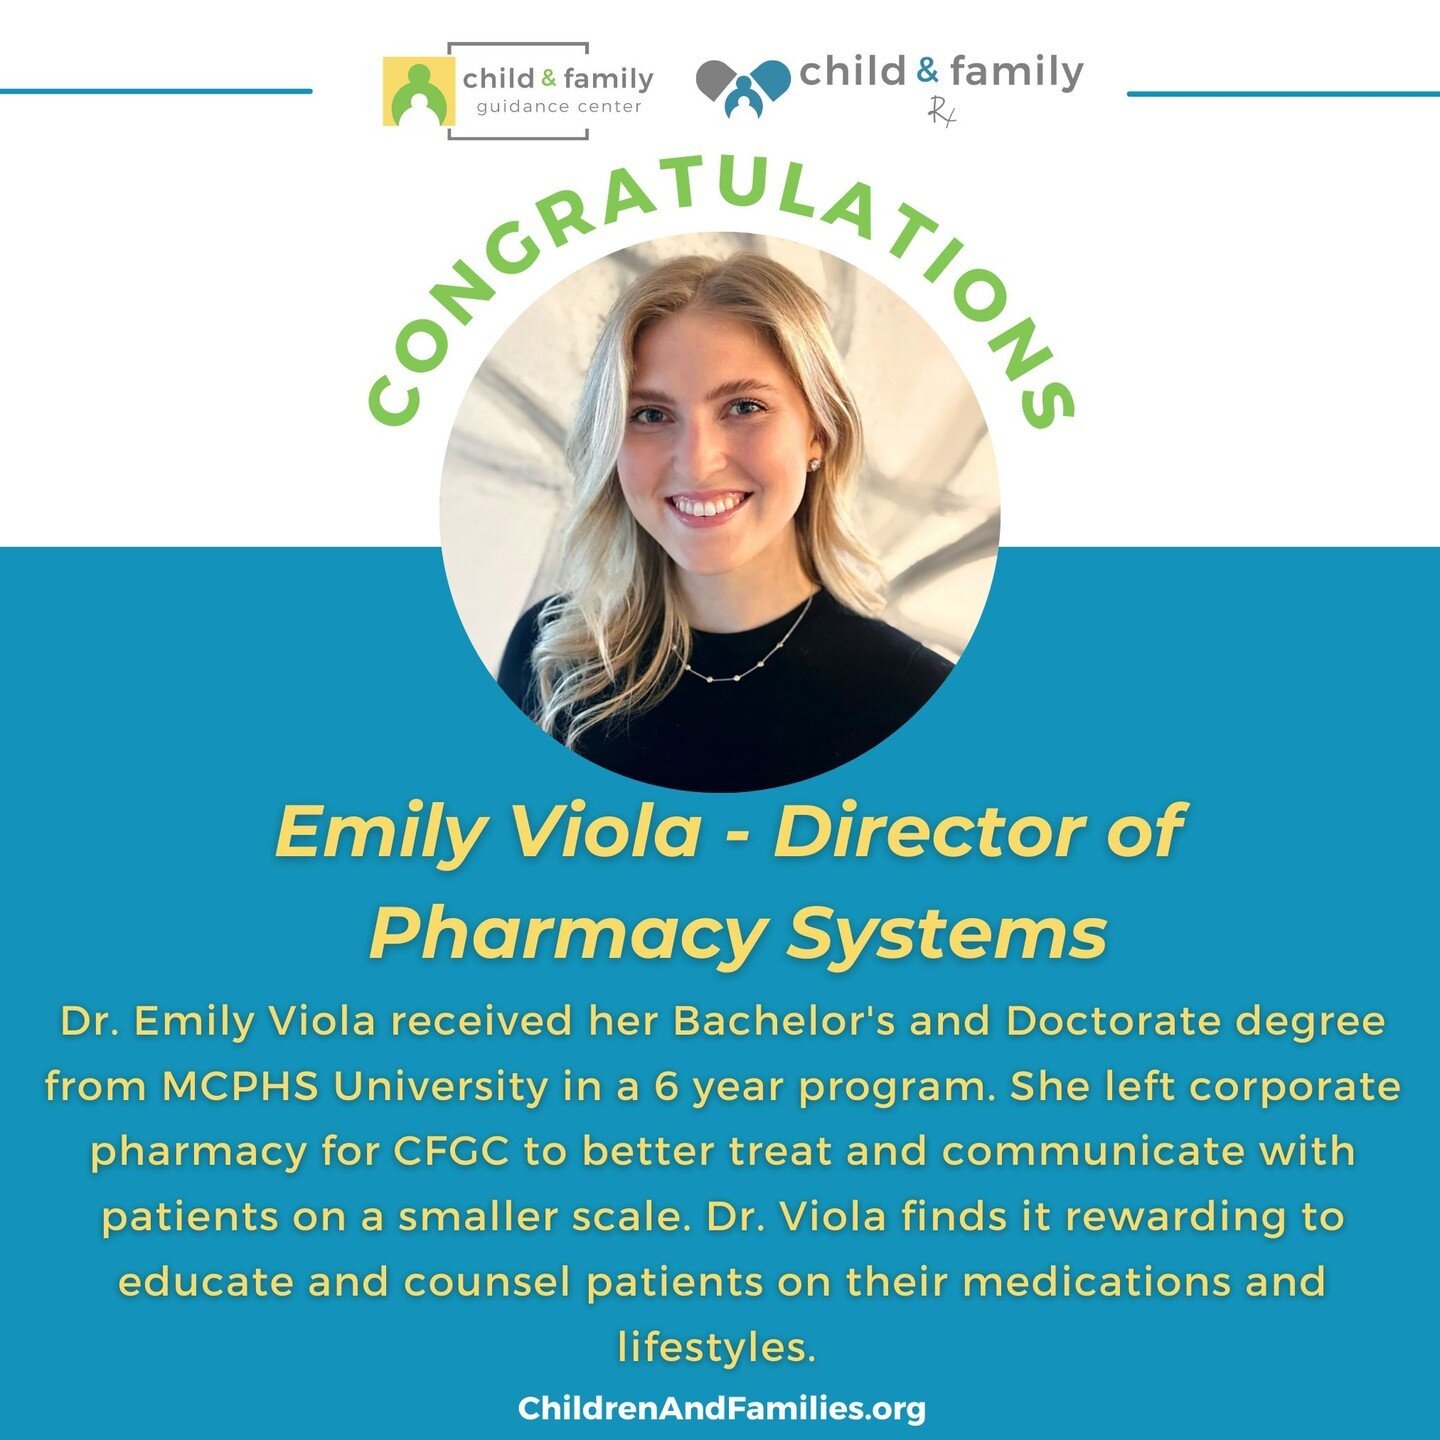 Congratulations to our newest Director of Pharmacy Systems, Dr. Emily Viola! We're so excited to have a passionate and driven director who will help us provide comprehensive mental health care to our clients! Dr. Viola shares that her &quot;priority 